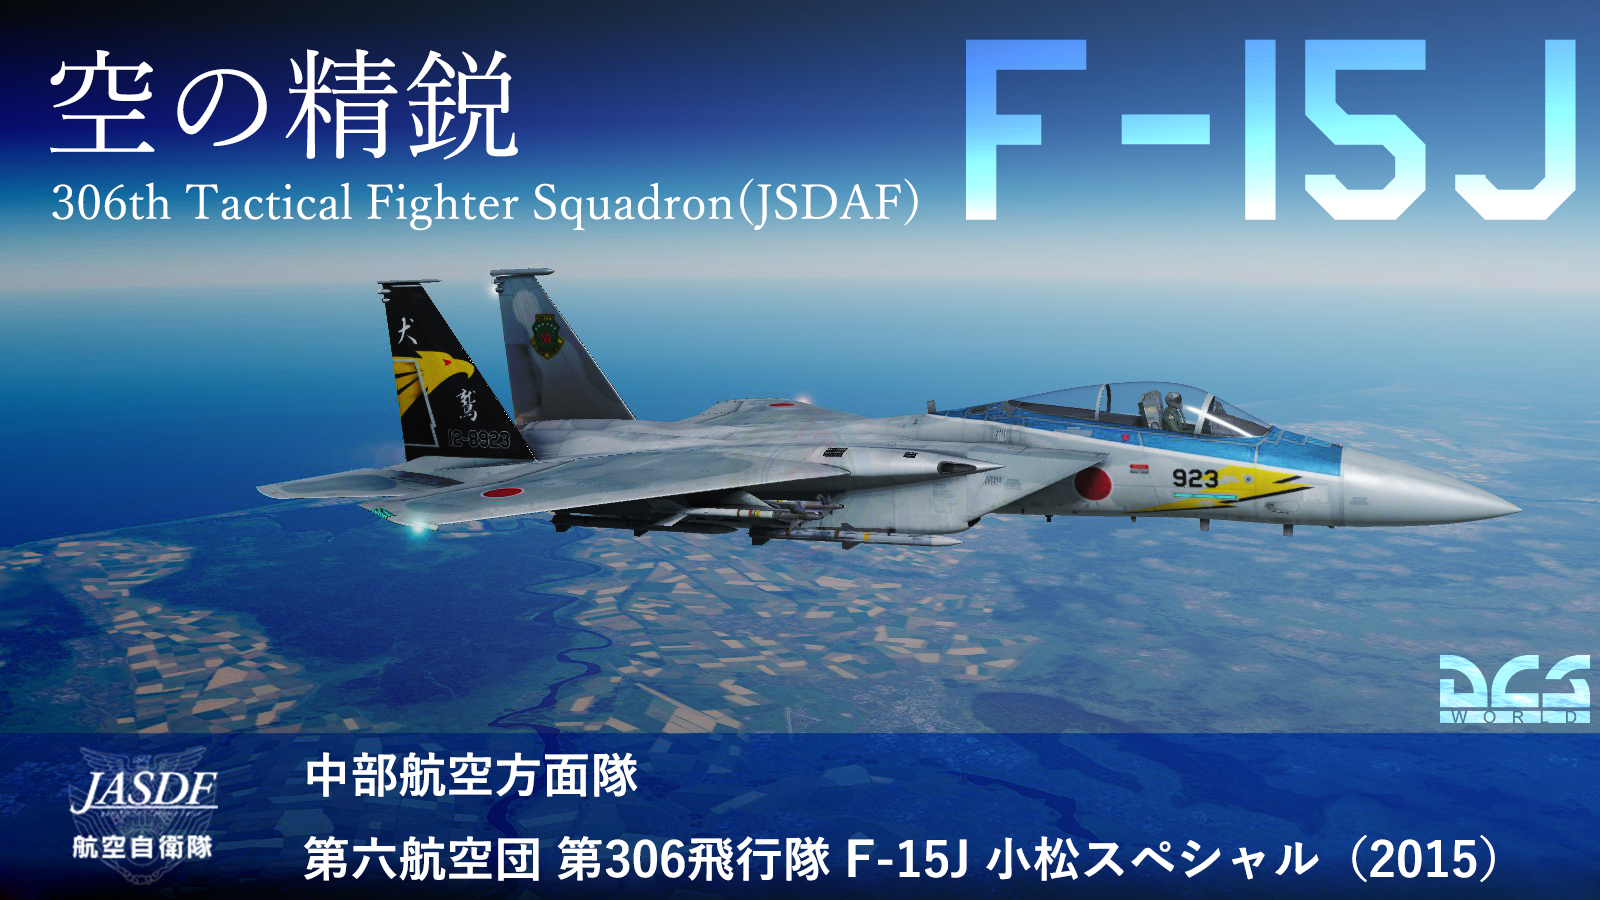 [Ver.2.0]306th Tactical Fighter Squadron of the Japan Air Self-Defense Force (JSDAF)